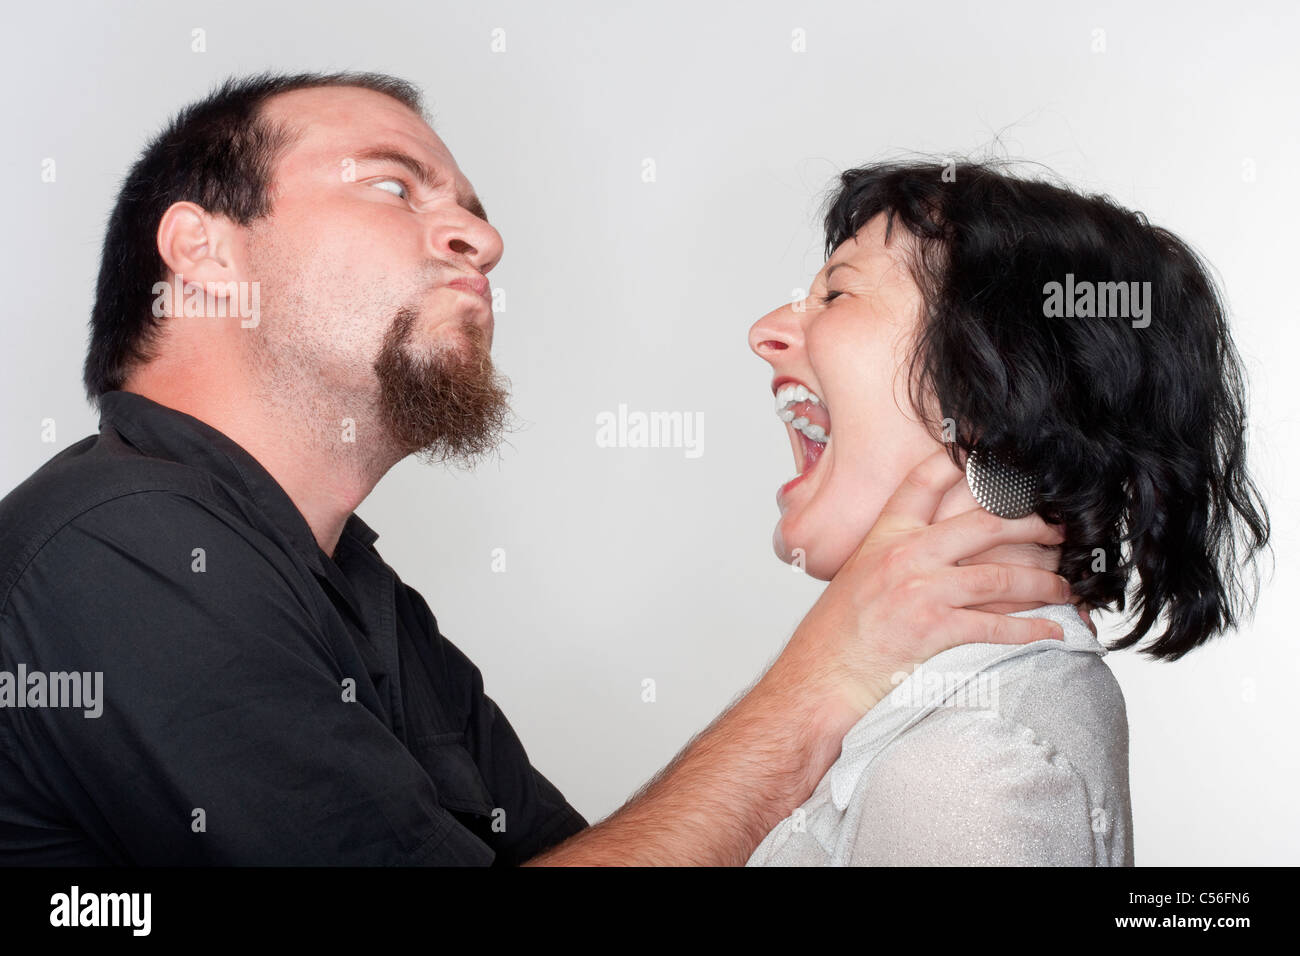 Couple fighting, l'homme abuse de la femme - isolated on white Banque D'Images